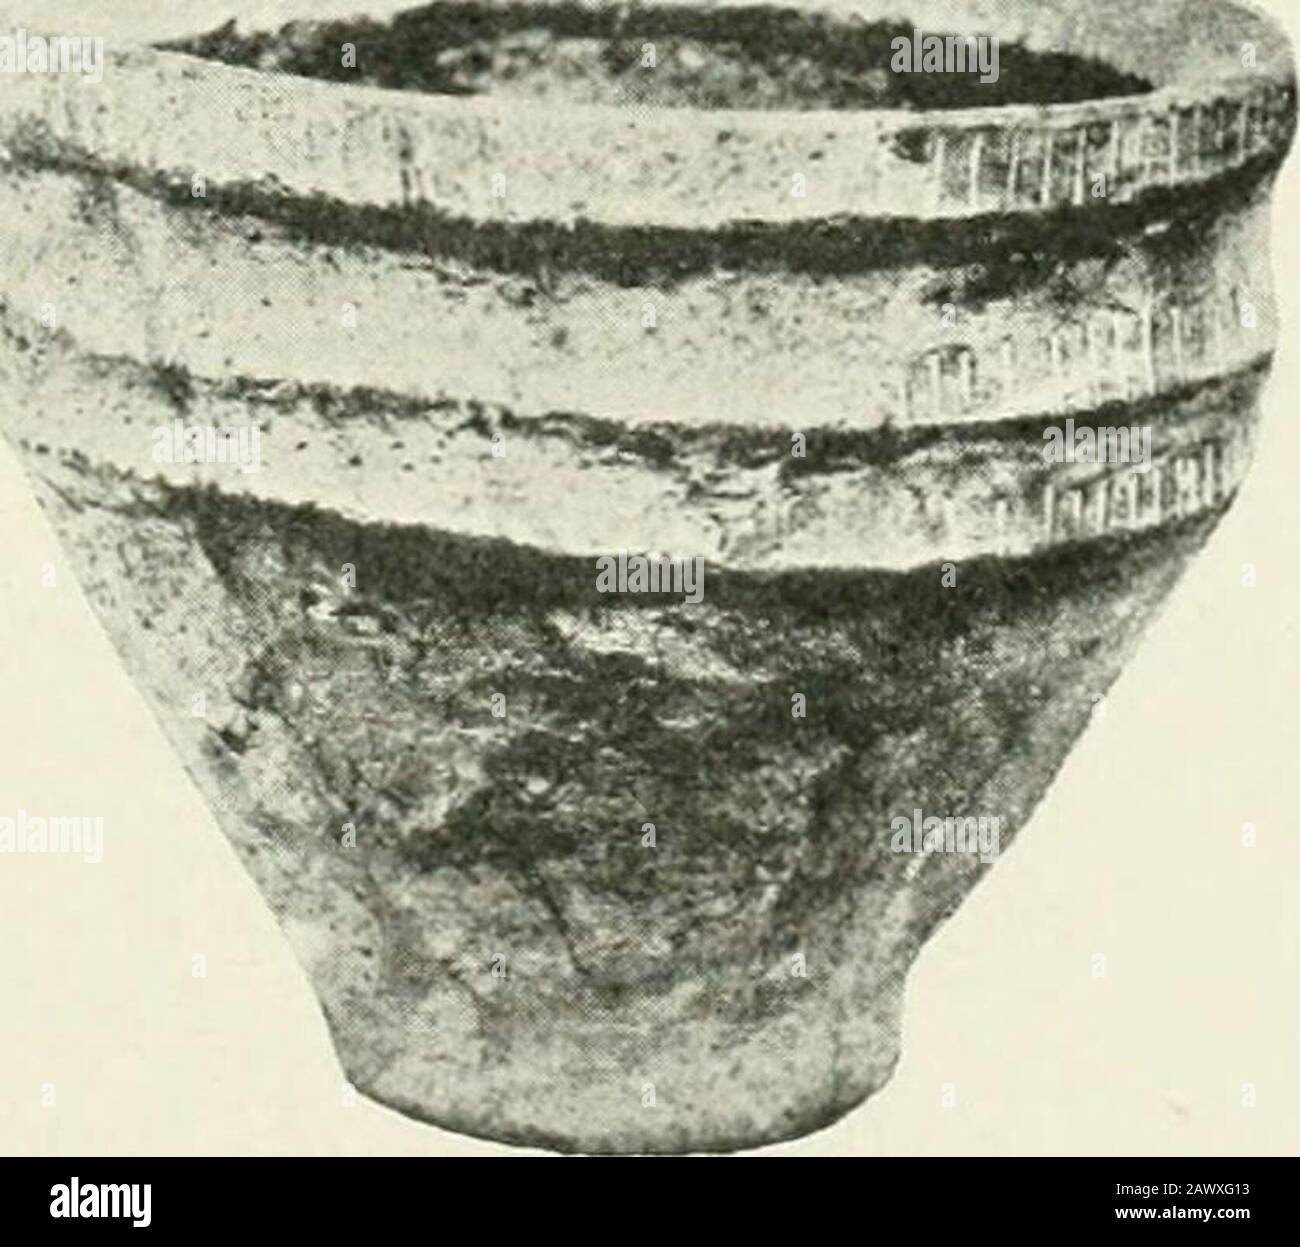 An introduction to the study of prehistoric art . ^^^. Fig. 220.-Food vessels. (After Abercromby.) 190 PREHISTORIC ART by far the most usual ornament being a surface patternconsisting of parallel line chevrons covering the wholevessel without any intervening plain bands . Food vesselsare distributed in three regions by Mr. Abercromby. (i)The southern half of England where they are scarce; (2)the northern half where they are more numerous ; (3)Scotland and Ireland.^ In the last the ornamentation ismore elaborate. The technique is the same as that ofbeakers, but in addition whipped cord and fals Stock Photo